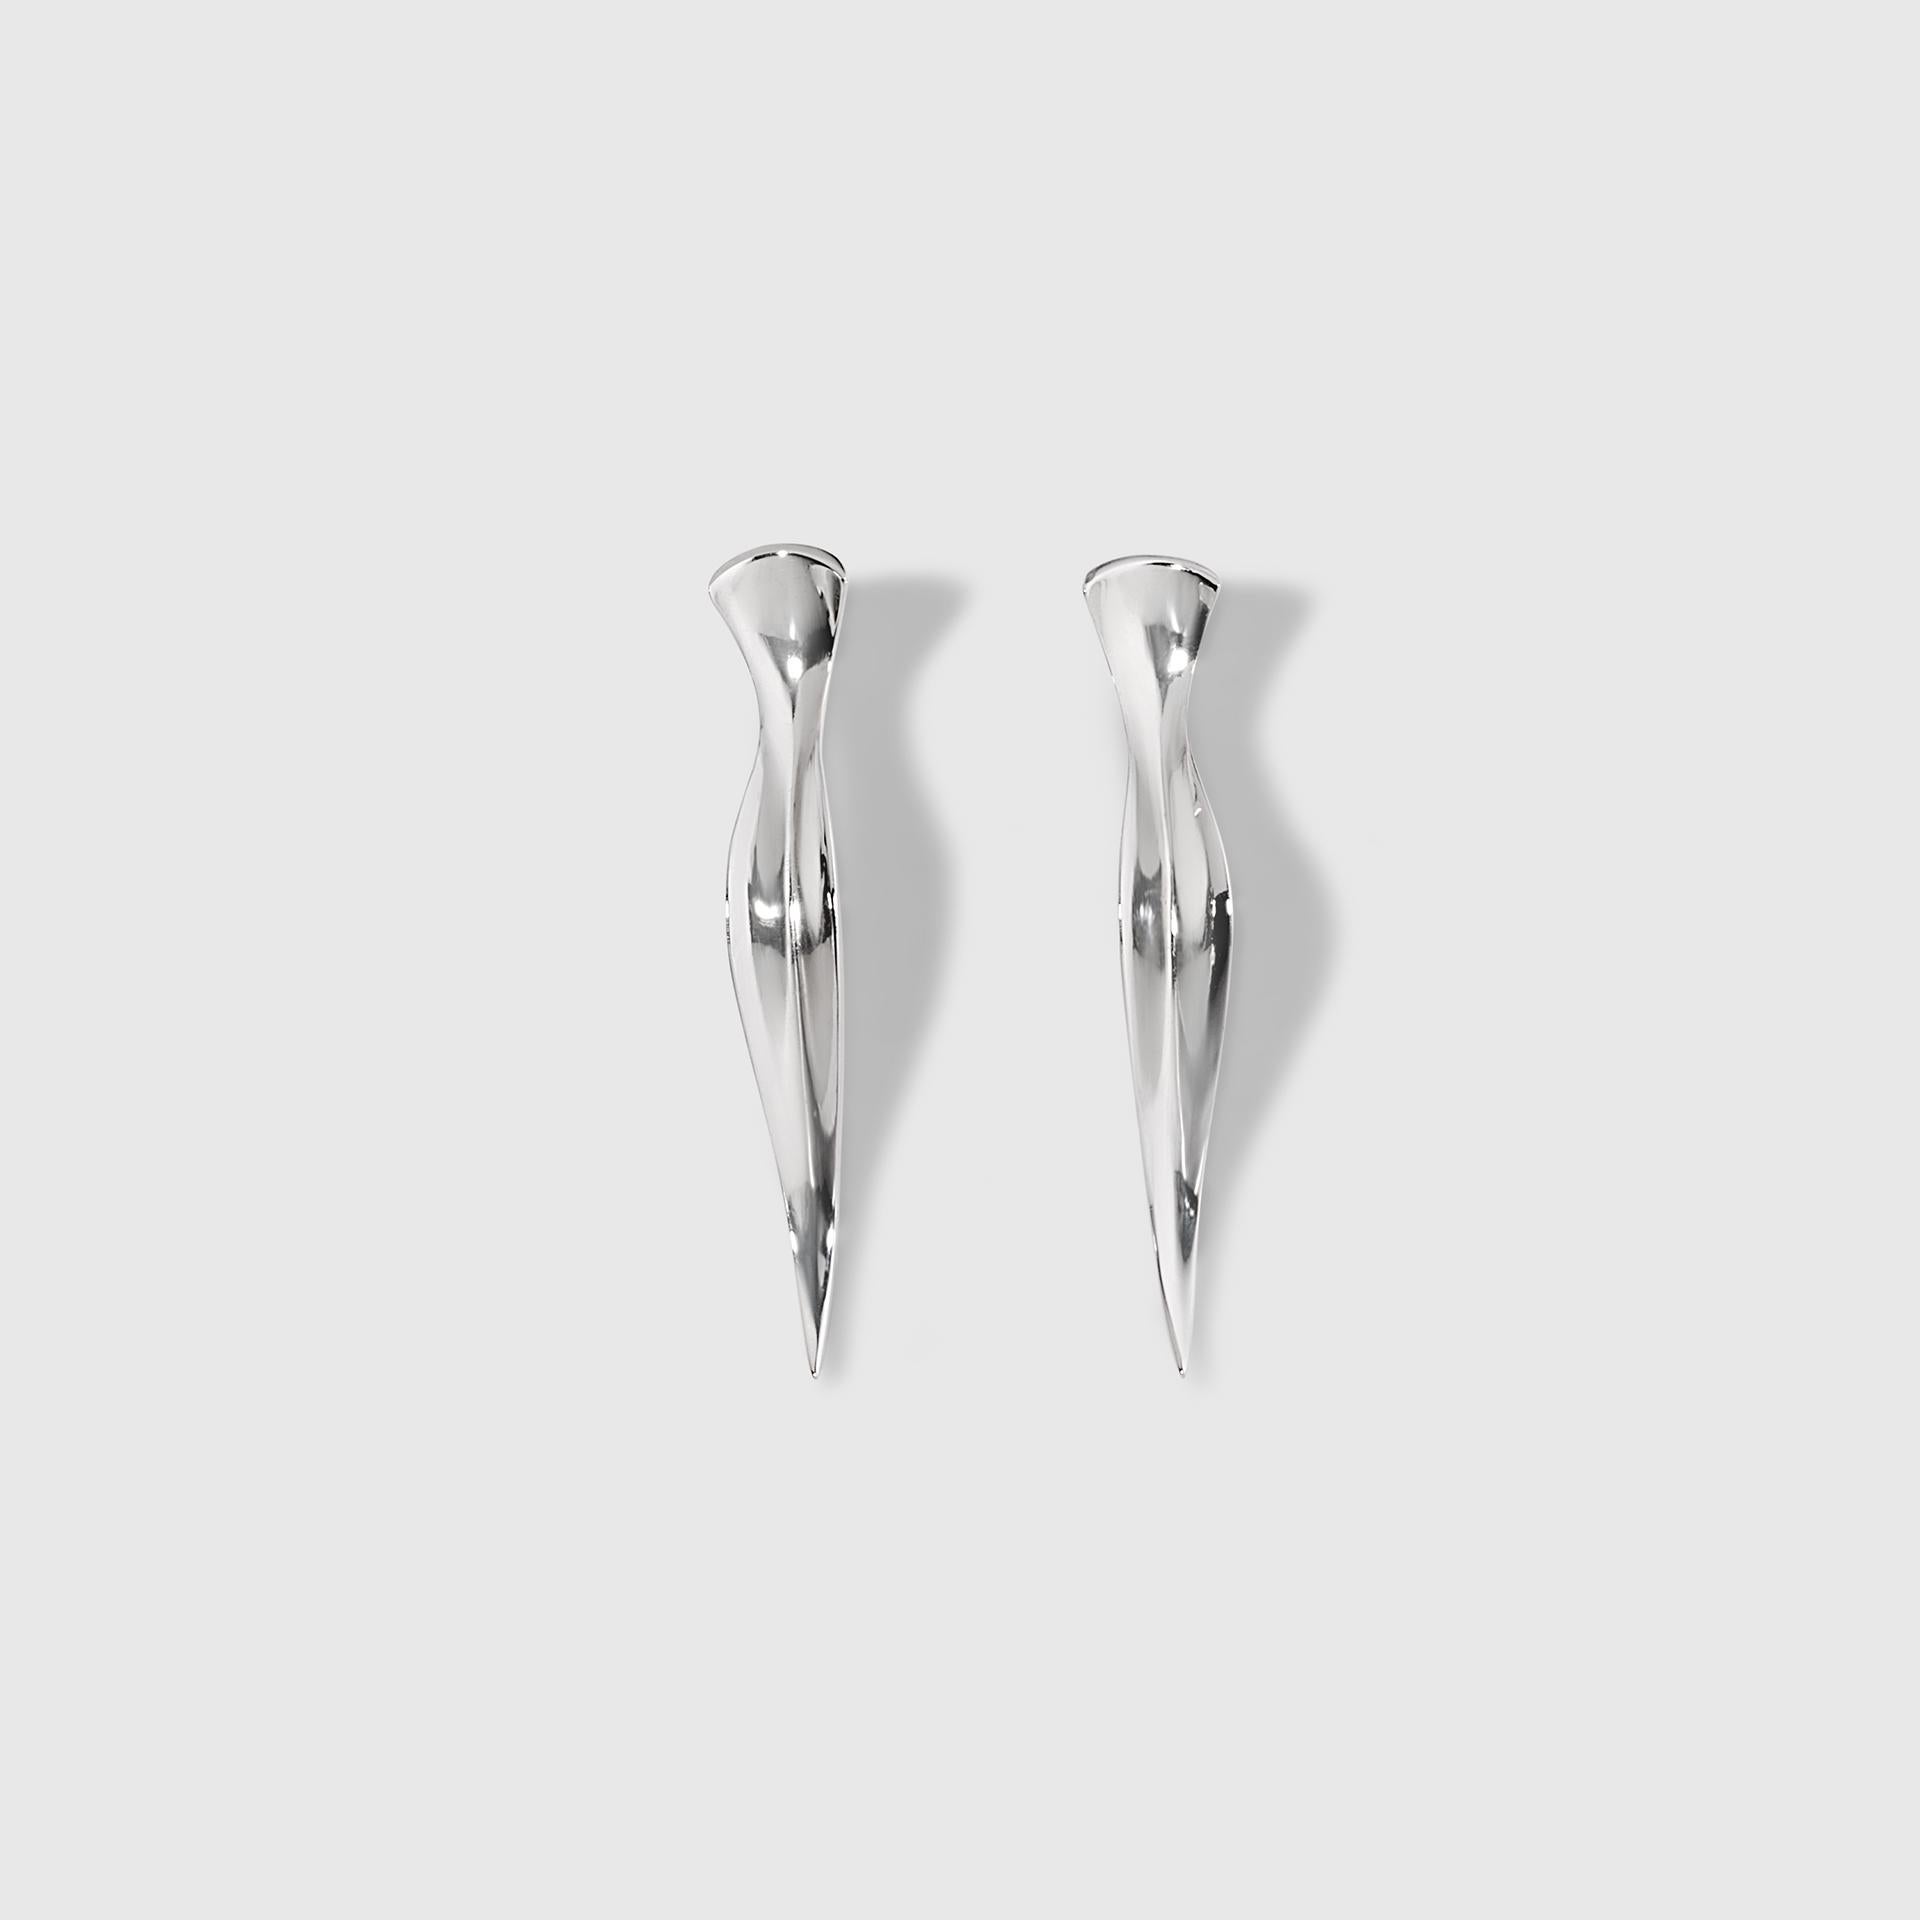 Couture Sculptural Contemporary, Long Pointed Earrings in 18K White Gold For Sale 1